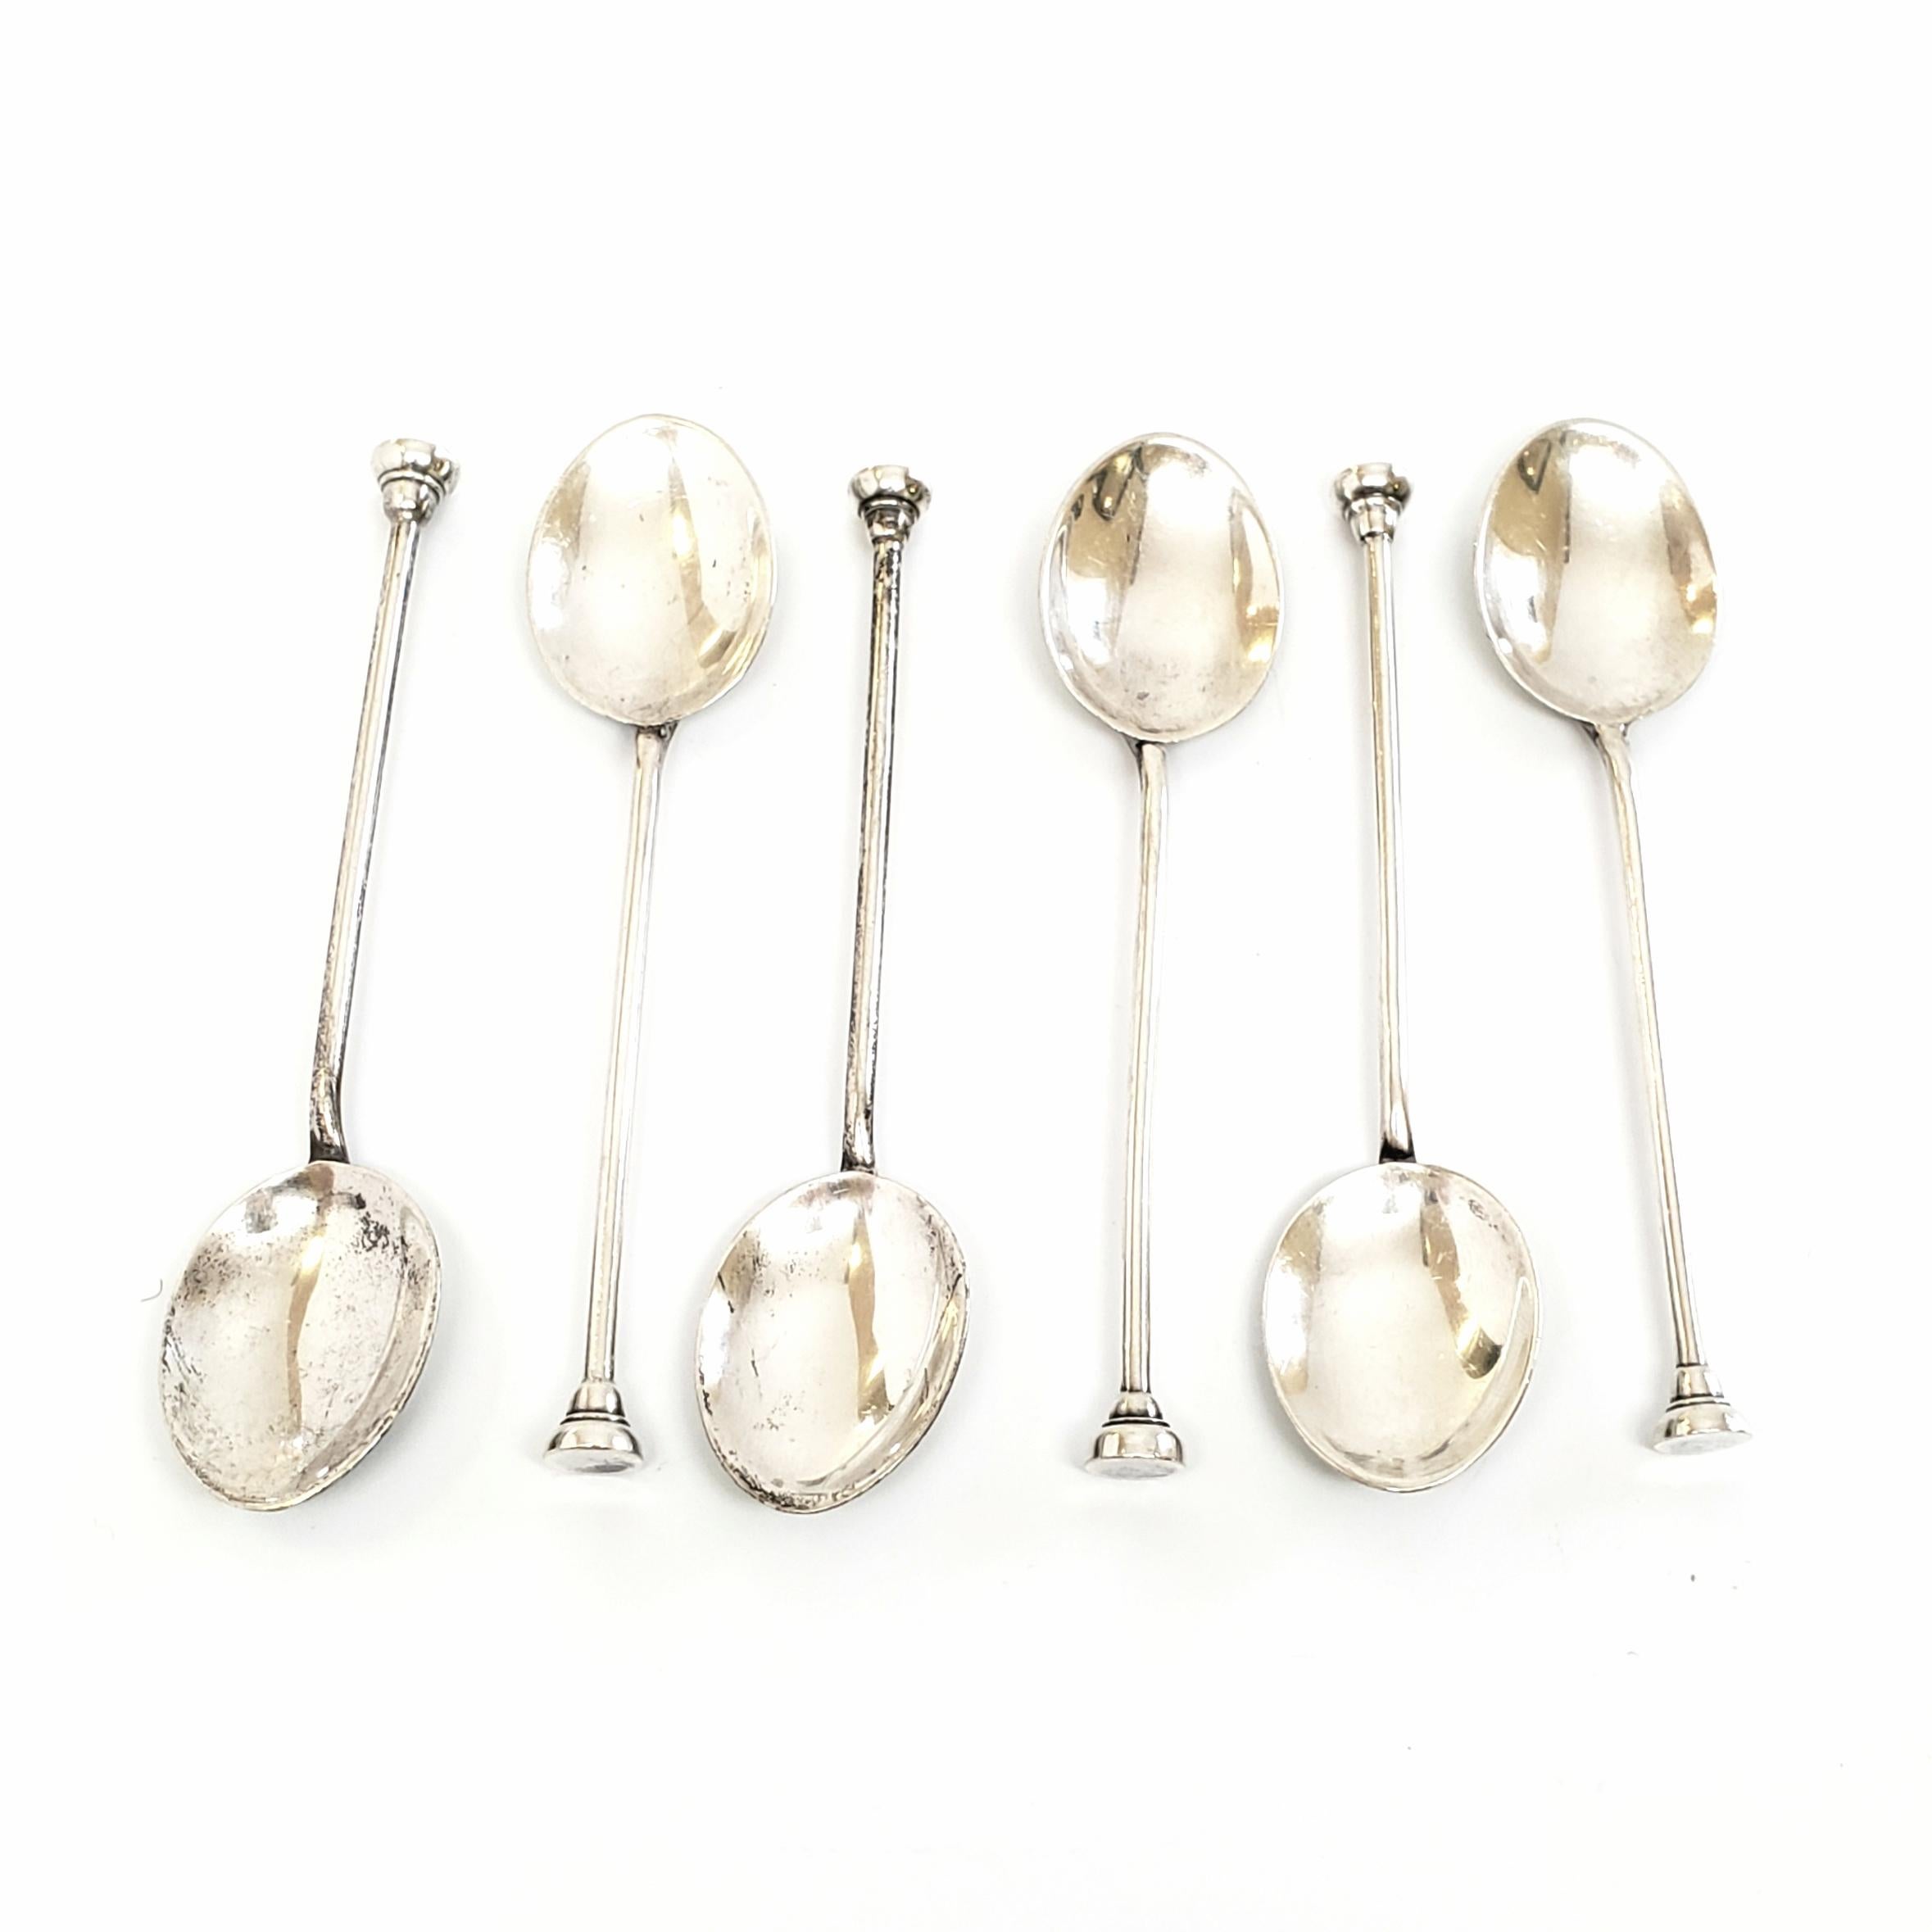 Set of 6 vintage sterling silver demitasse spoons by Henry Clifford Davis, Ltd.

Beautifully enameled, hand painted spoons with pink and purple flowers on the anterior of the bowls.

Measures 3 5/8